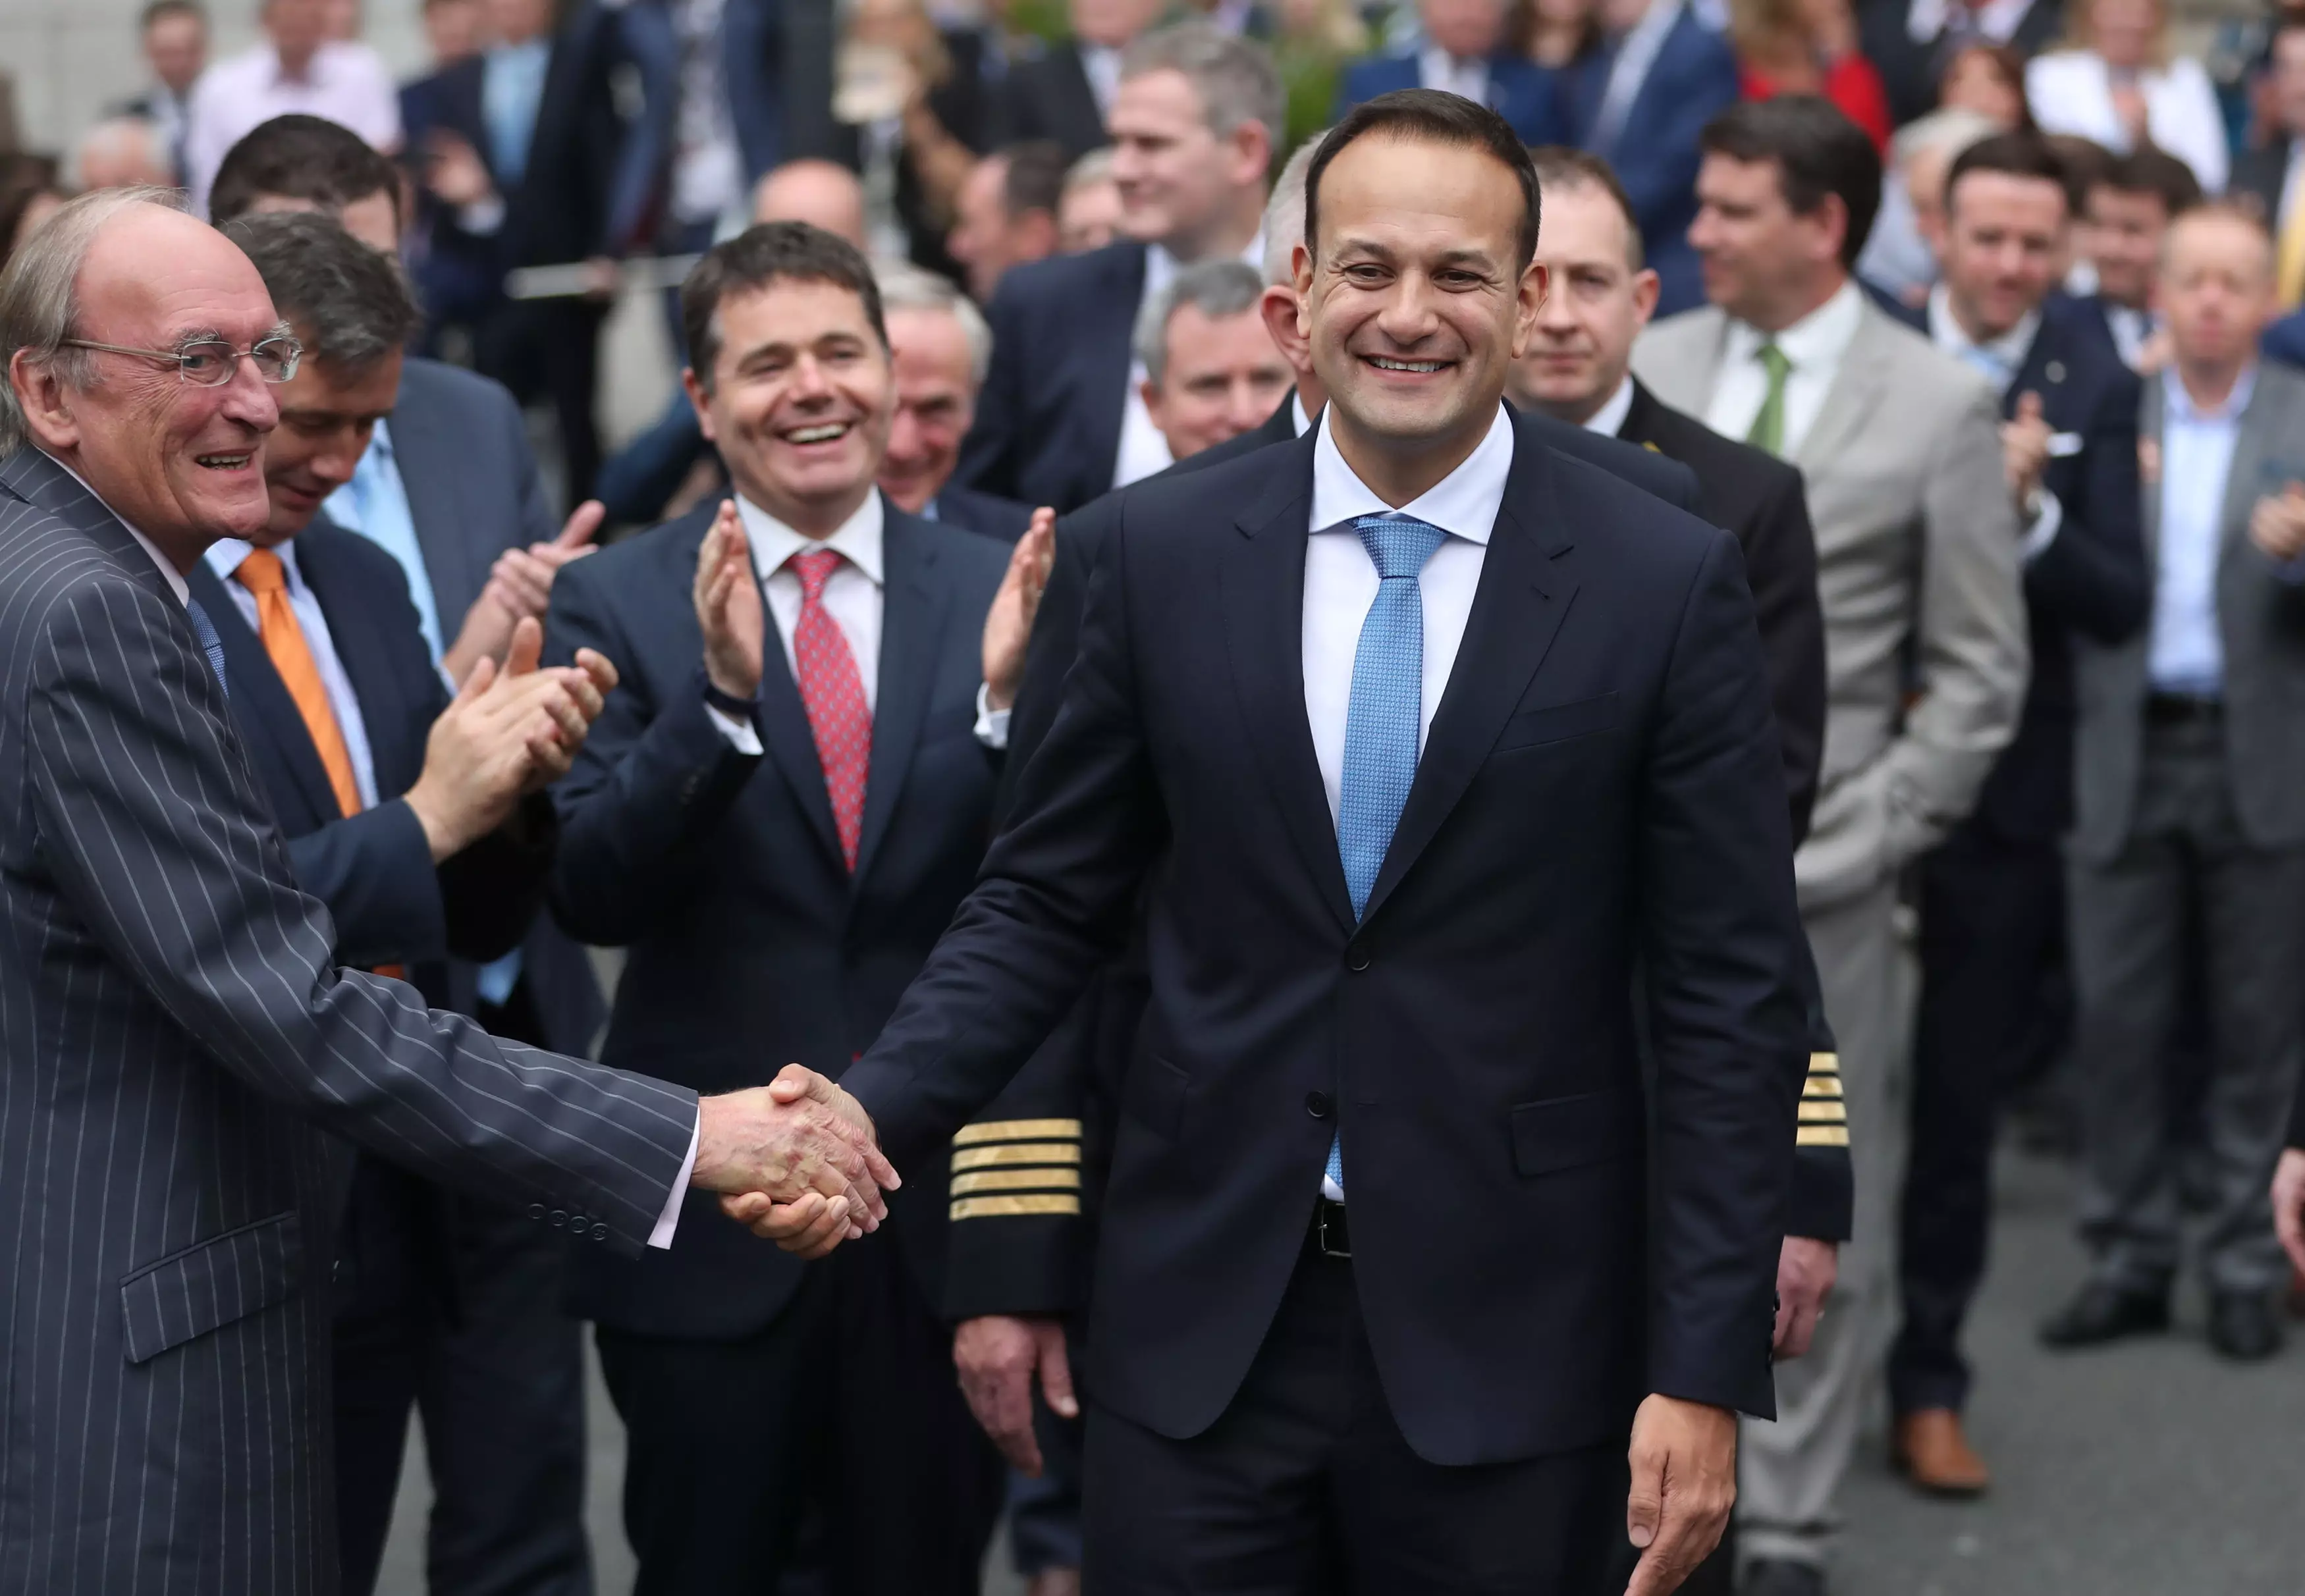 Leo Varadkar being congratulated by supporters